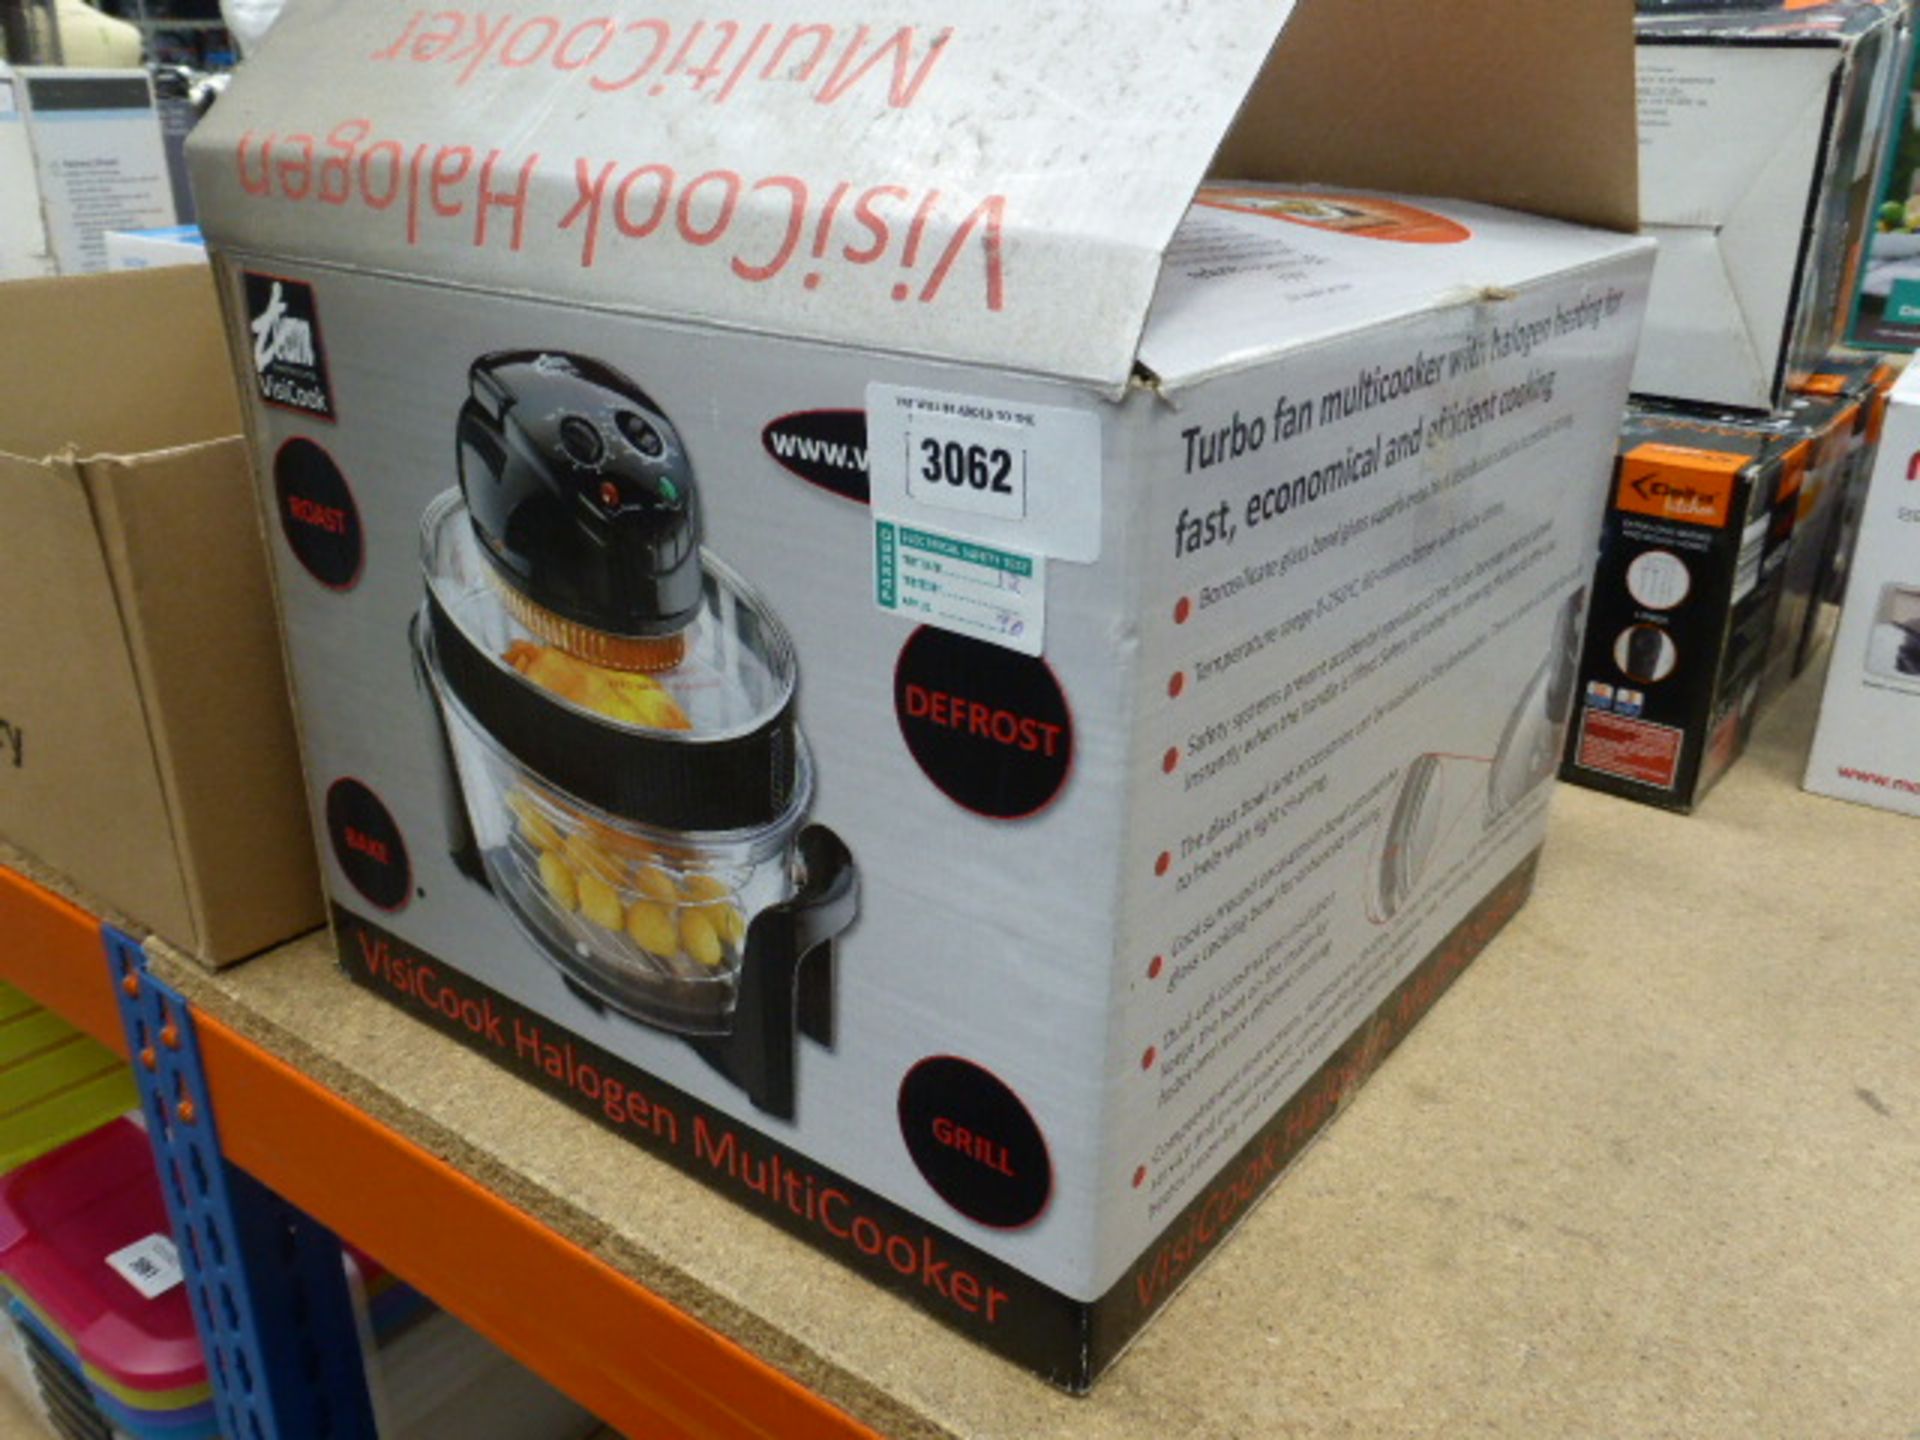 Two boxed Halogen multi cookers